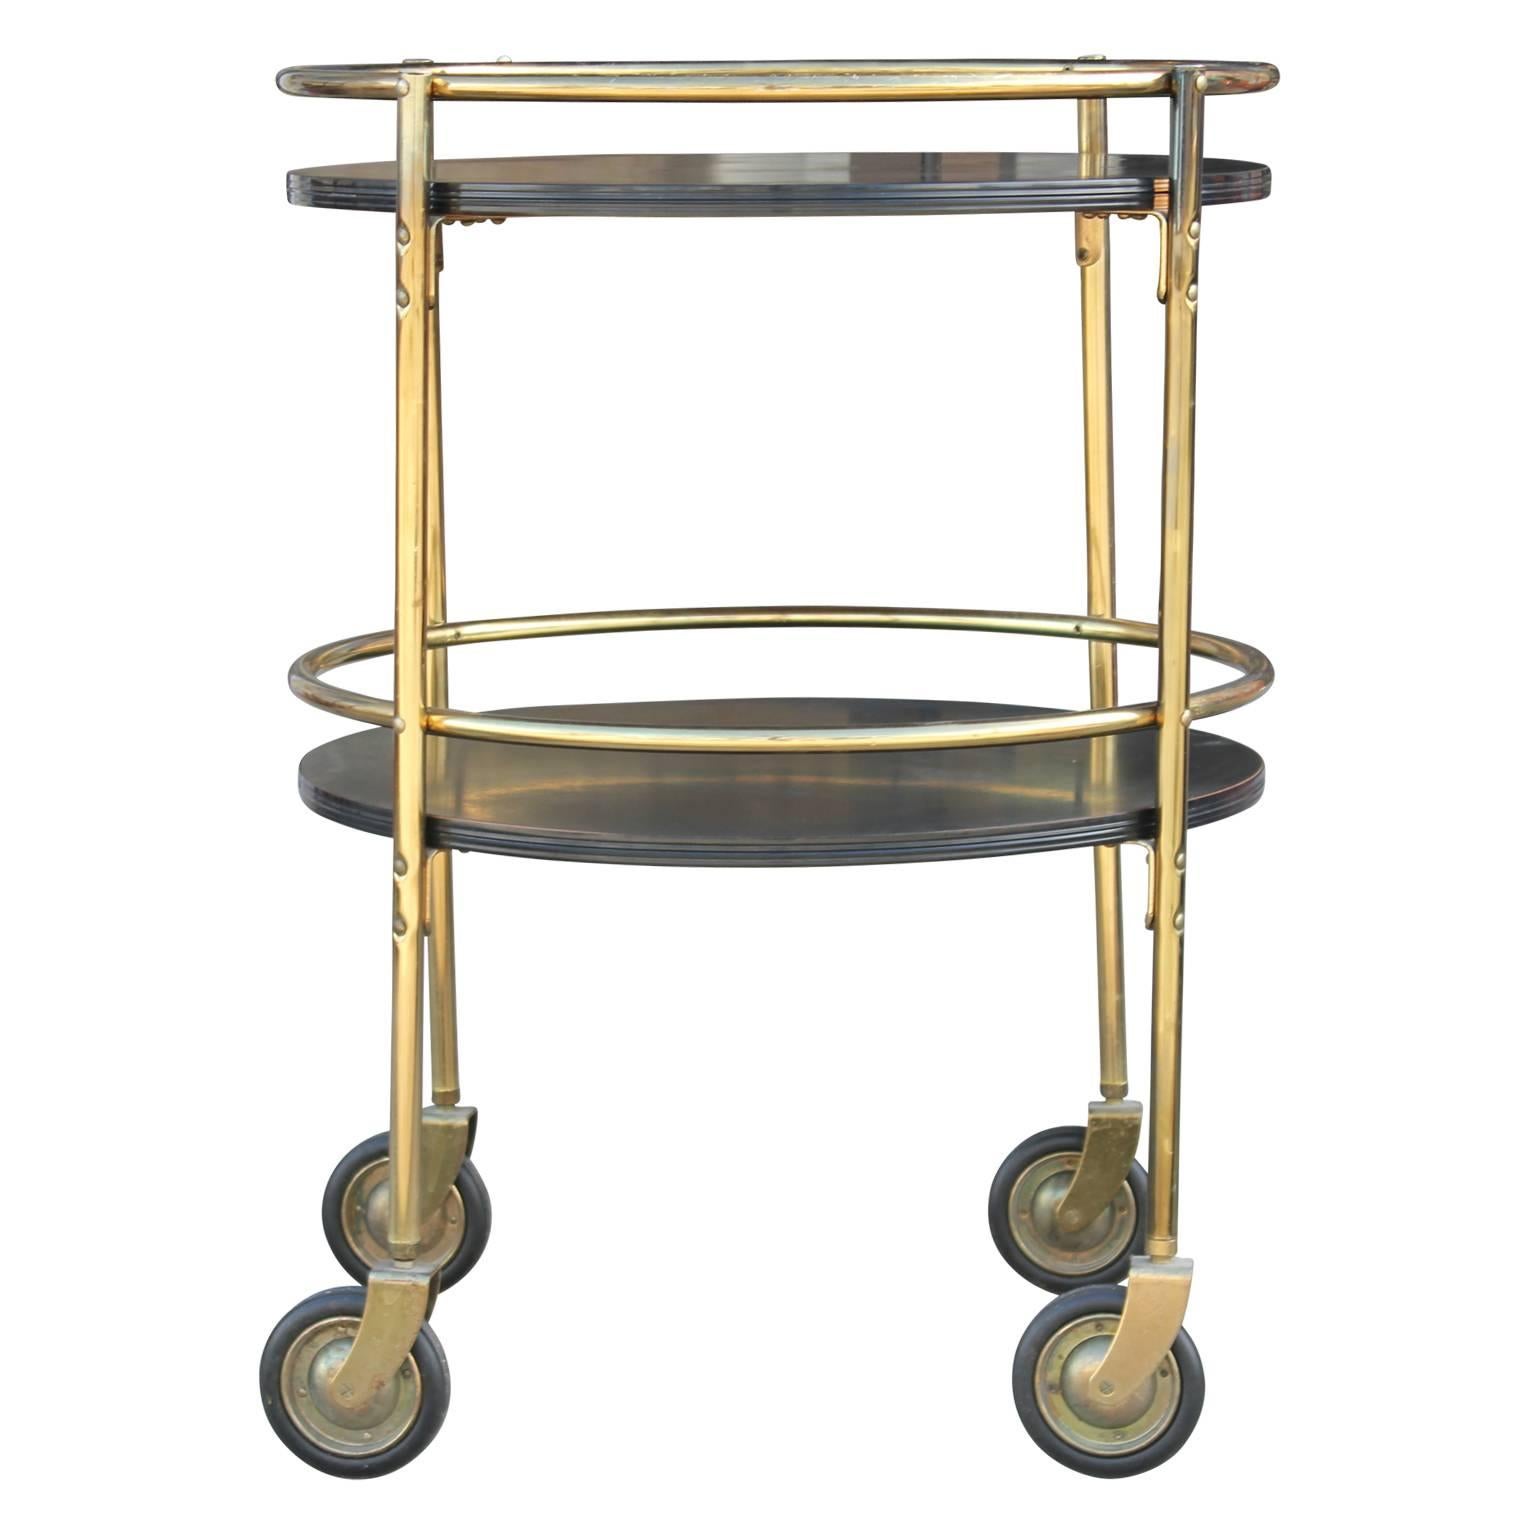 Mid-20th Century Modern Round Two Tiered Black and Brass Bar Cart or Tea Cart 